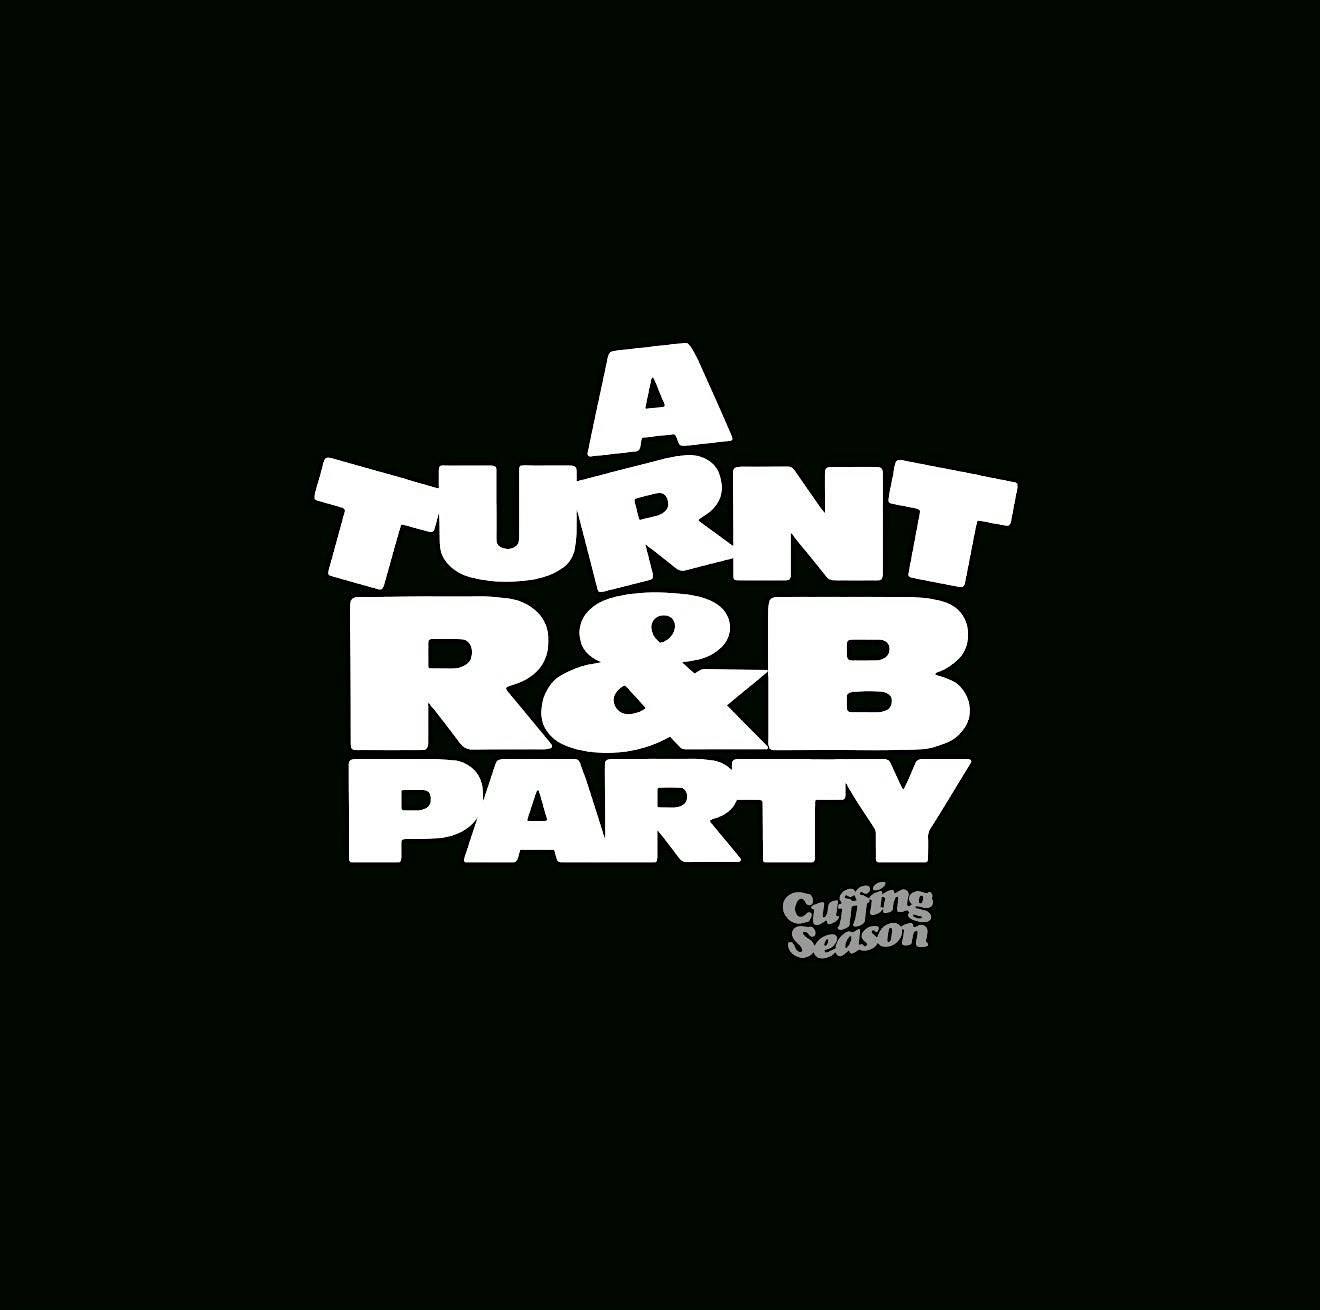 A Turnt R&B Party